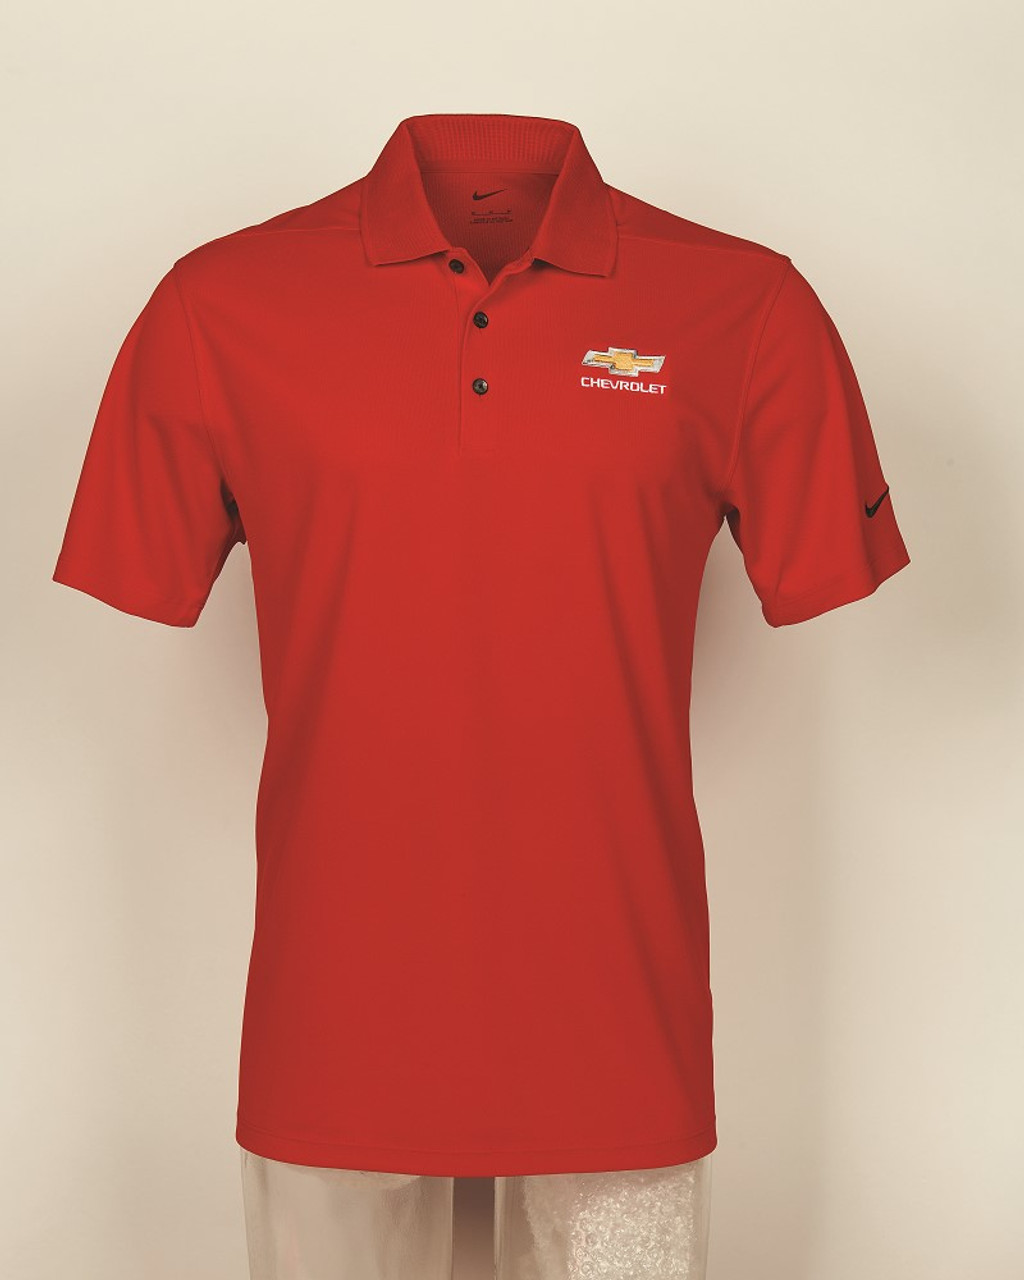 Chevrolet Gold Bowtie Nike Dri-Fit Polo Shirt - Red